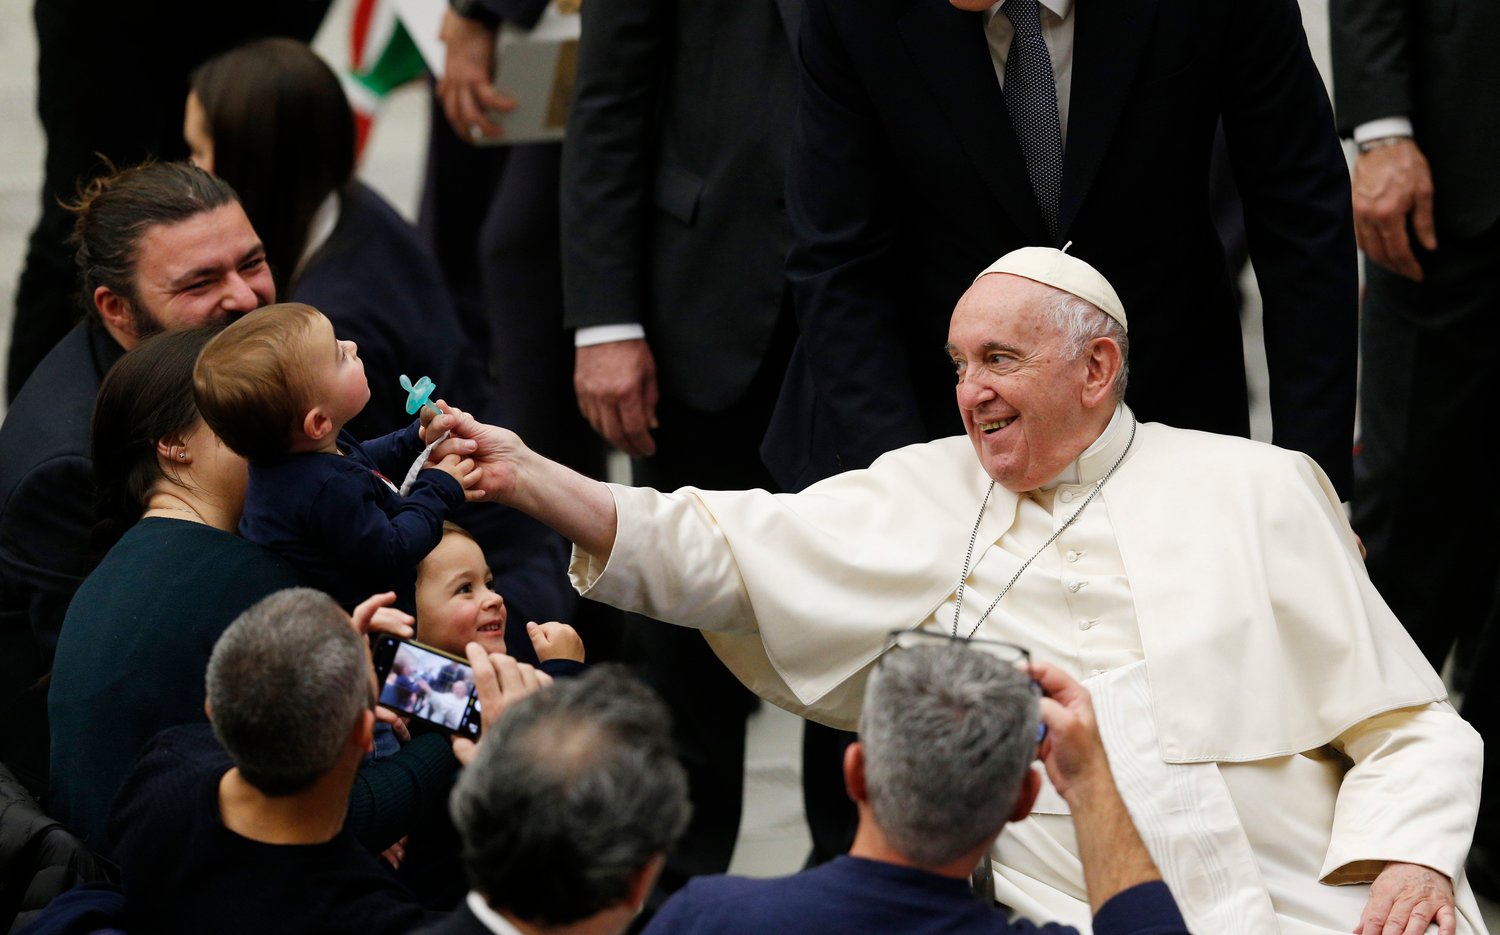 Pope Francis touches the pacifier of a child during his general audience in the Paul VI hall at the Vatican Dec. 14, 2022. (CNS photo/Paul Haring)